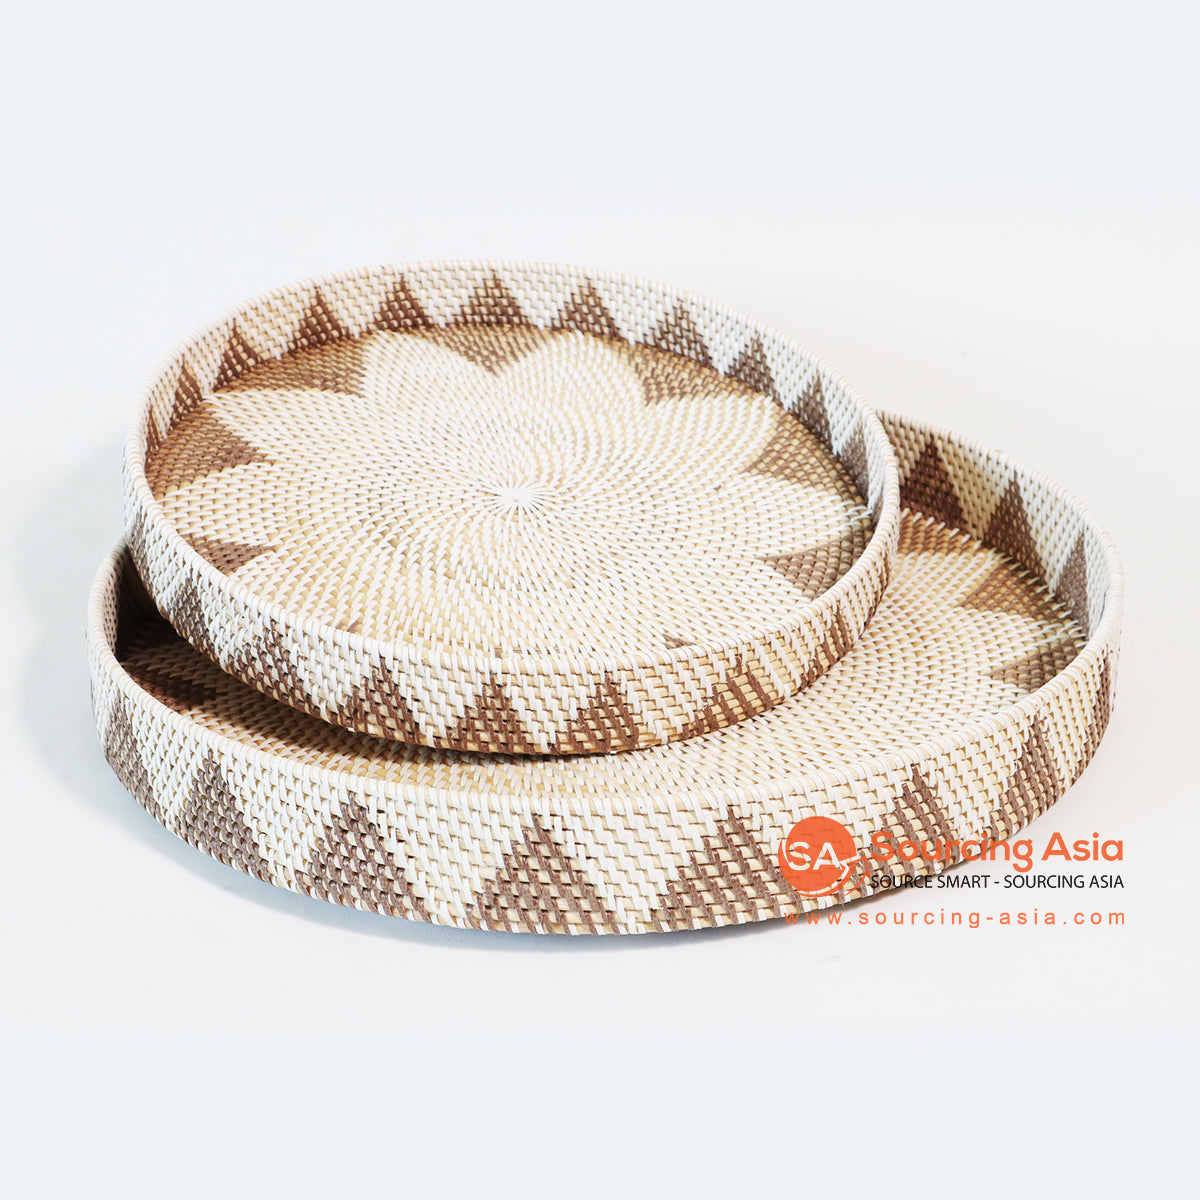 MTIC013 SET OF TWO BROWN AND NATURAL WOVEN RATTAN ROUND TRAYS